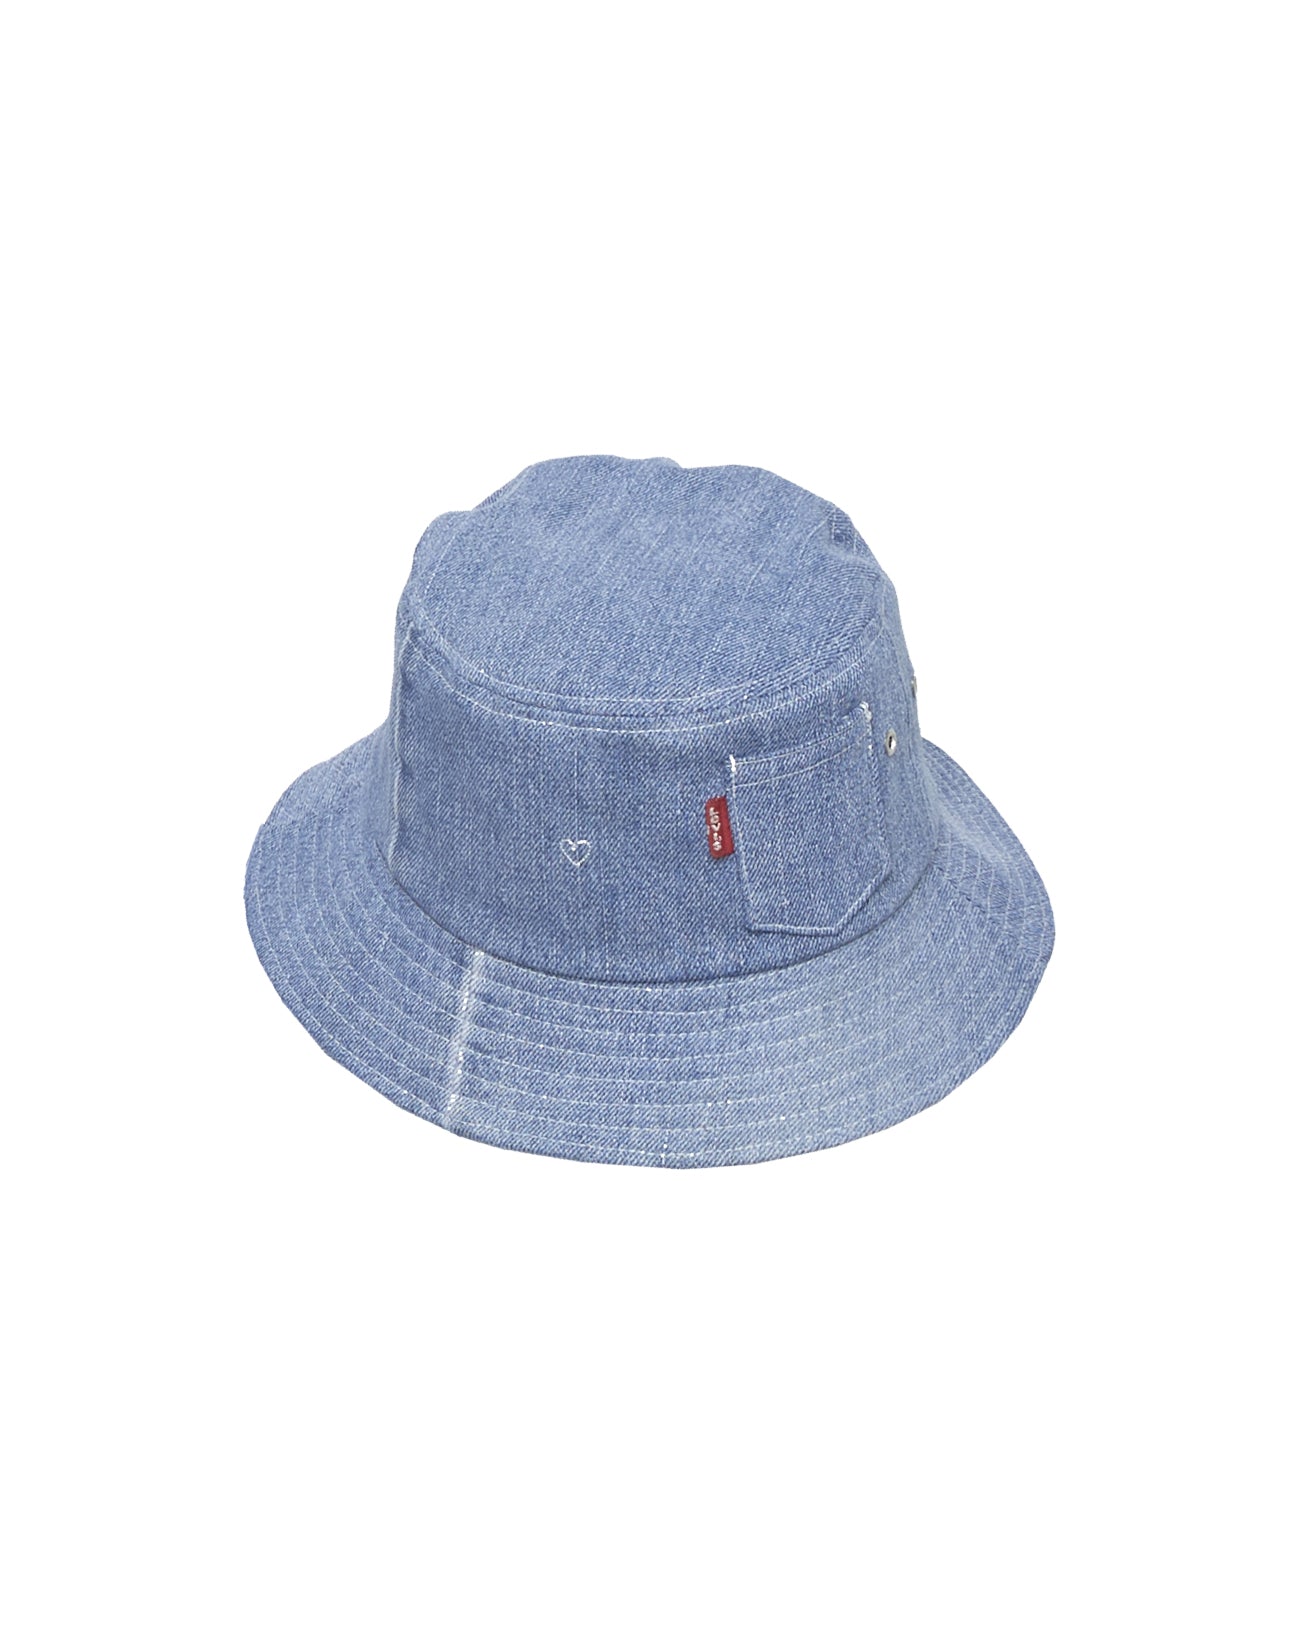 Heart Bucket hat for Sustainable Levis - used